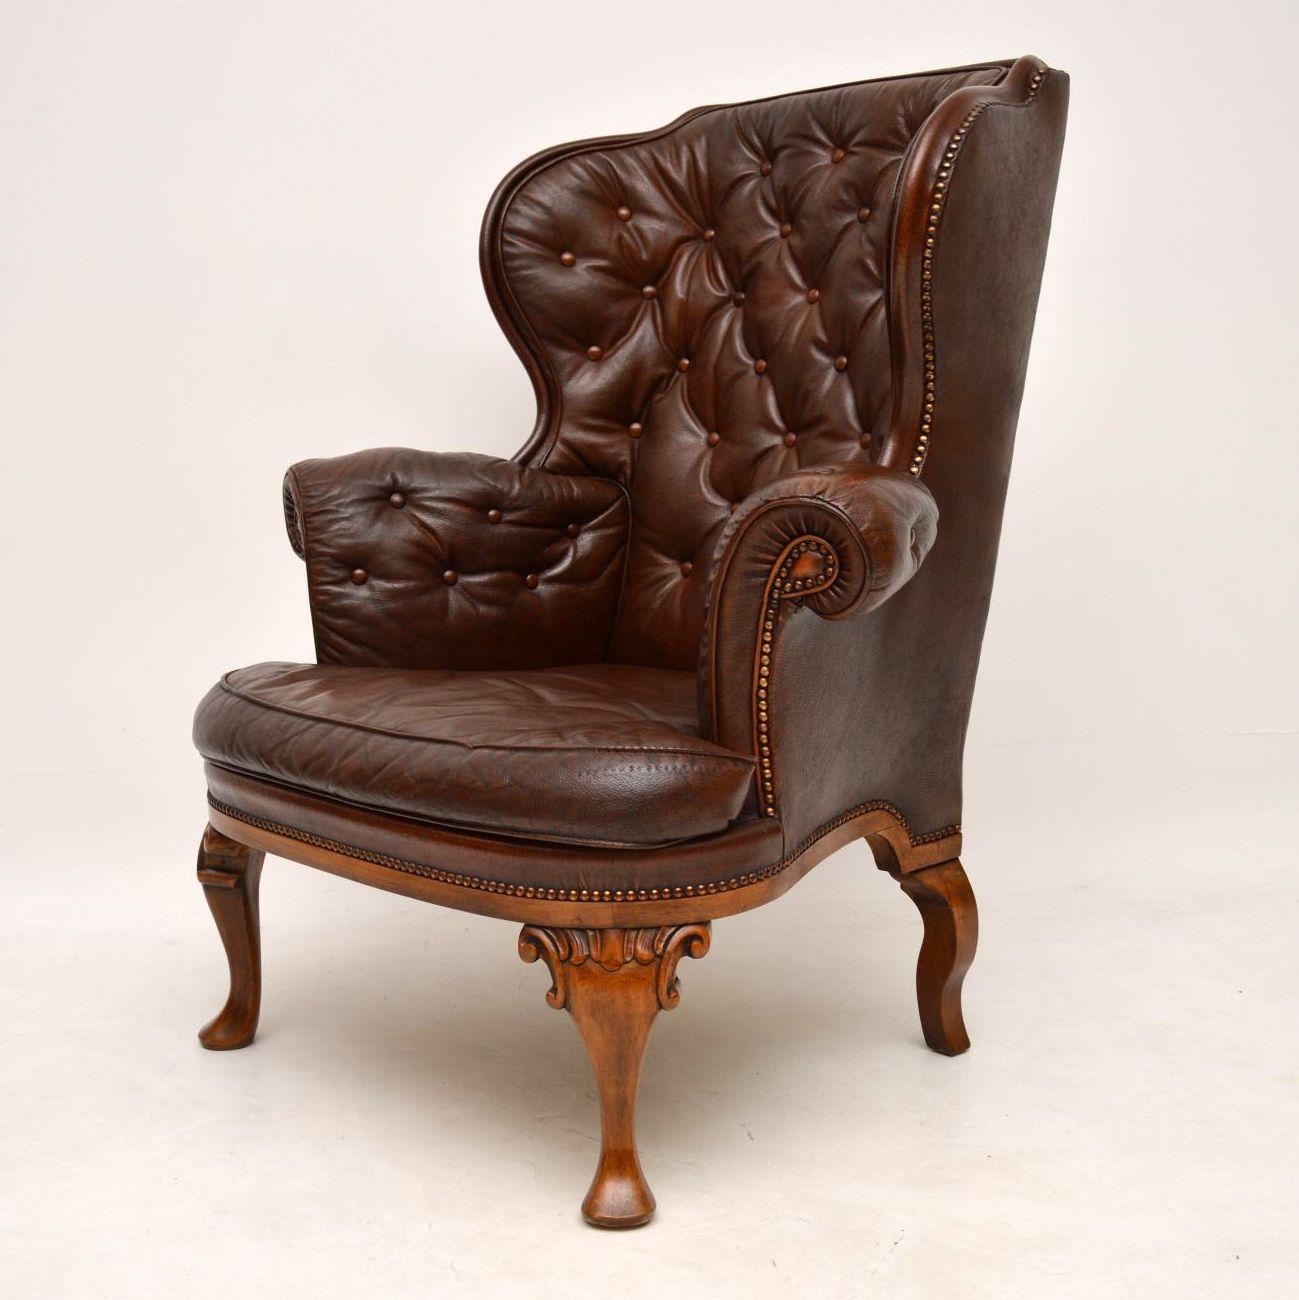 Edwardian Antique Swedish Leather Wing Back Armchair